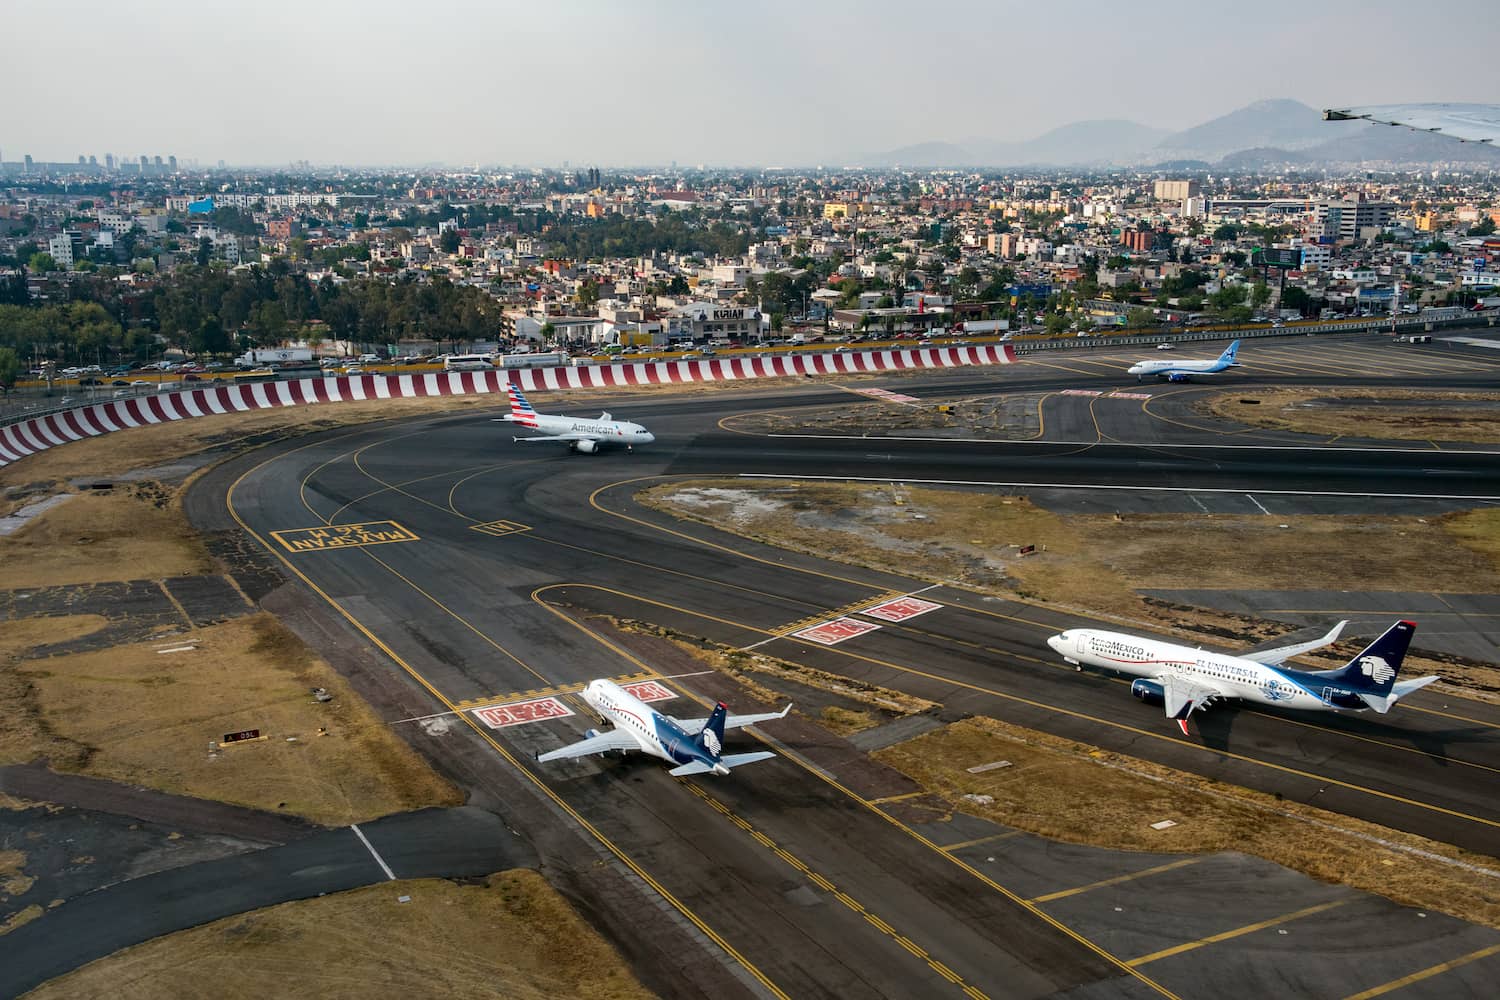 Hotels near Mexico City Airport